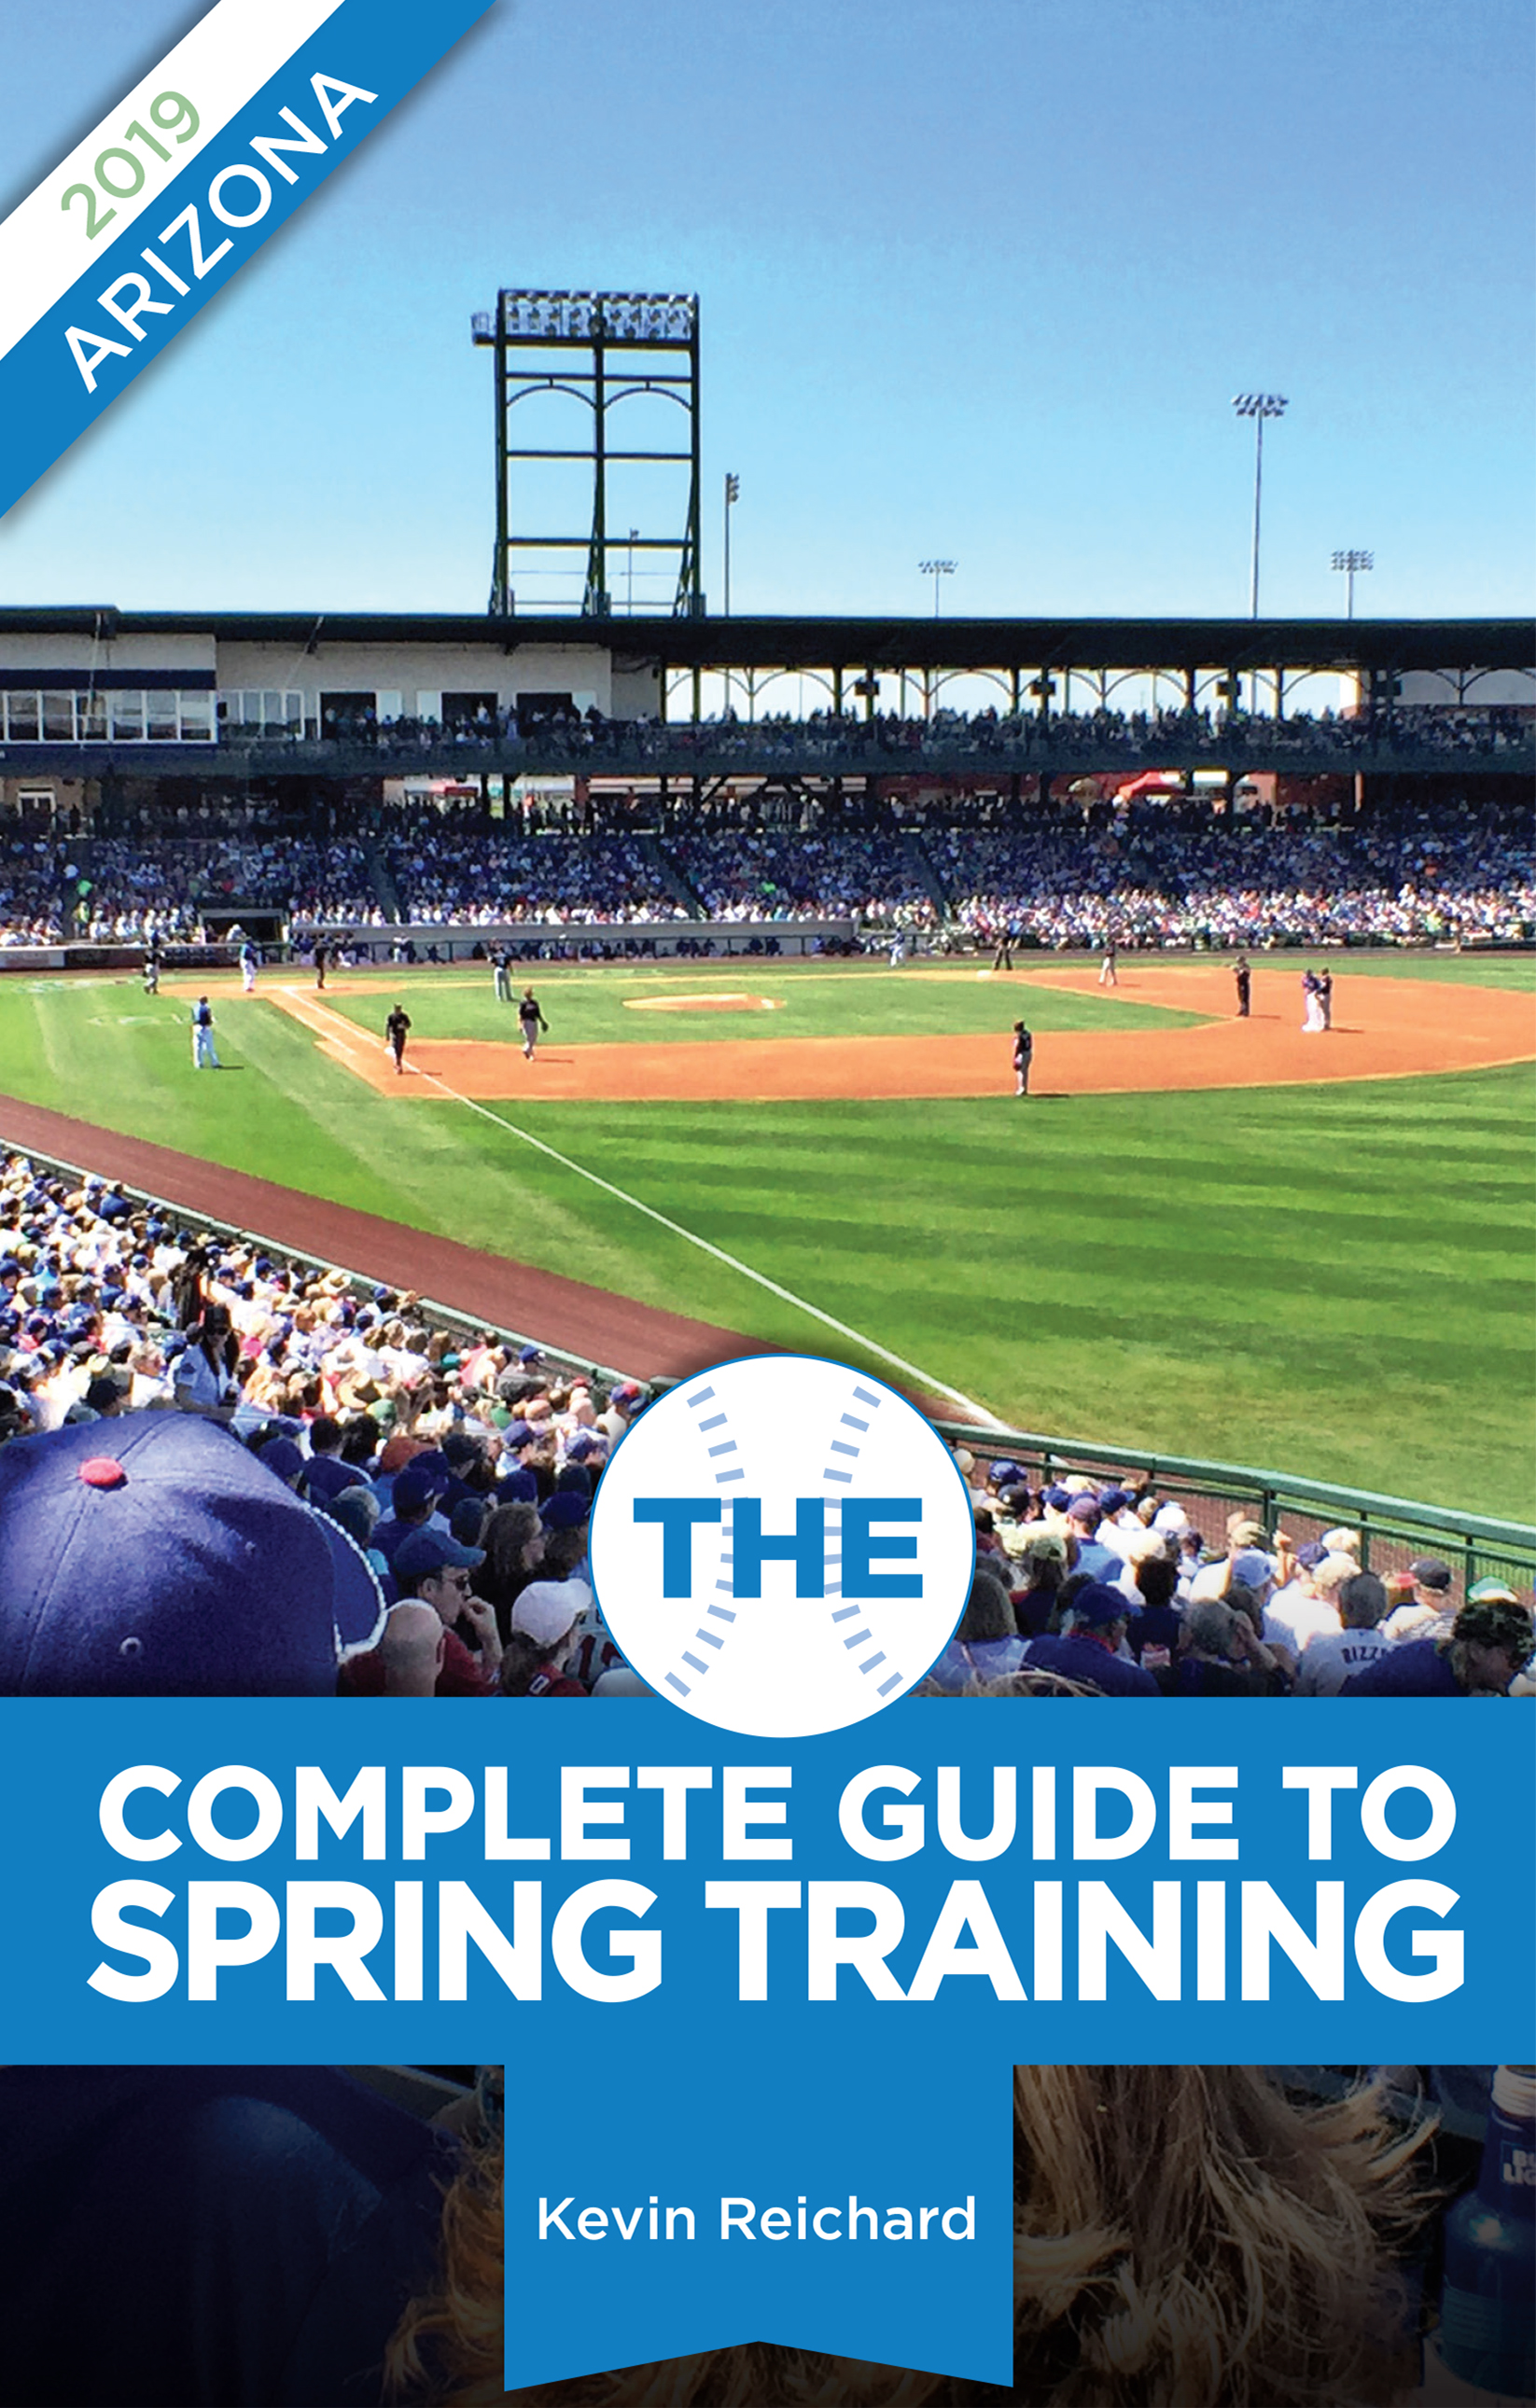 The Complete Guide to Spring Training 2019 / Arizona